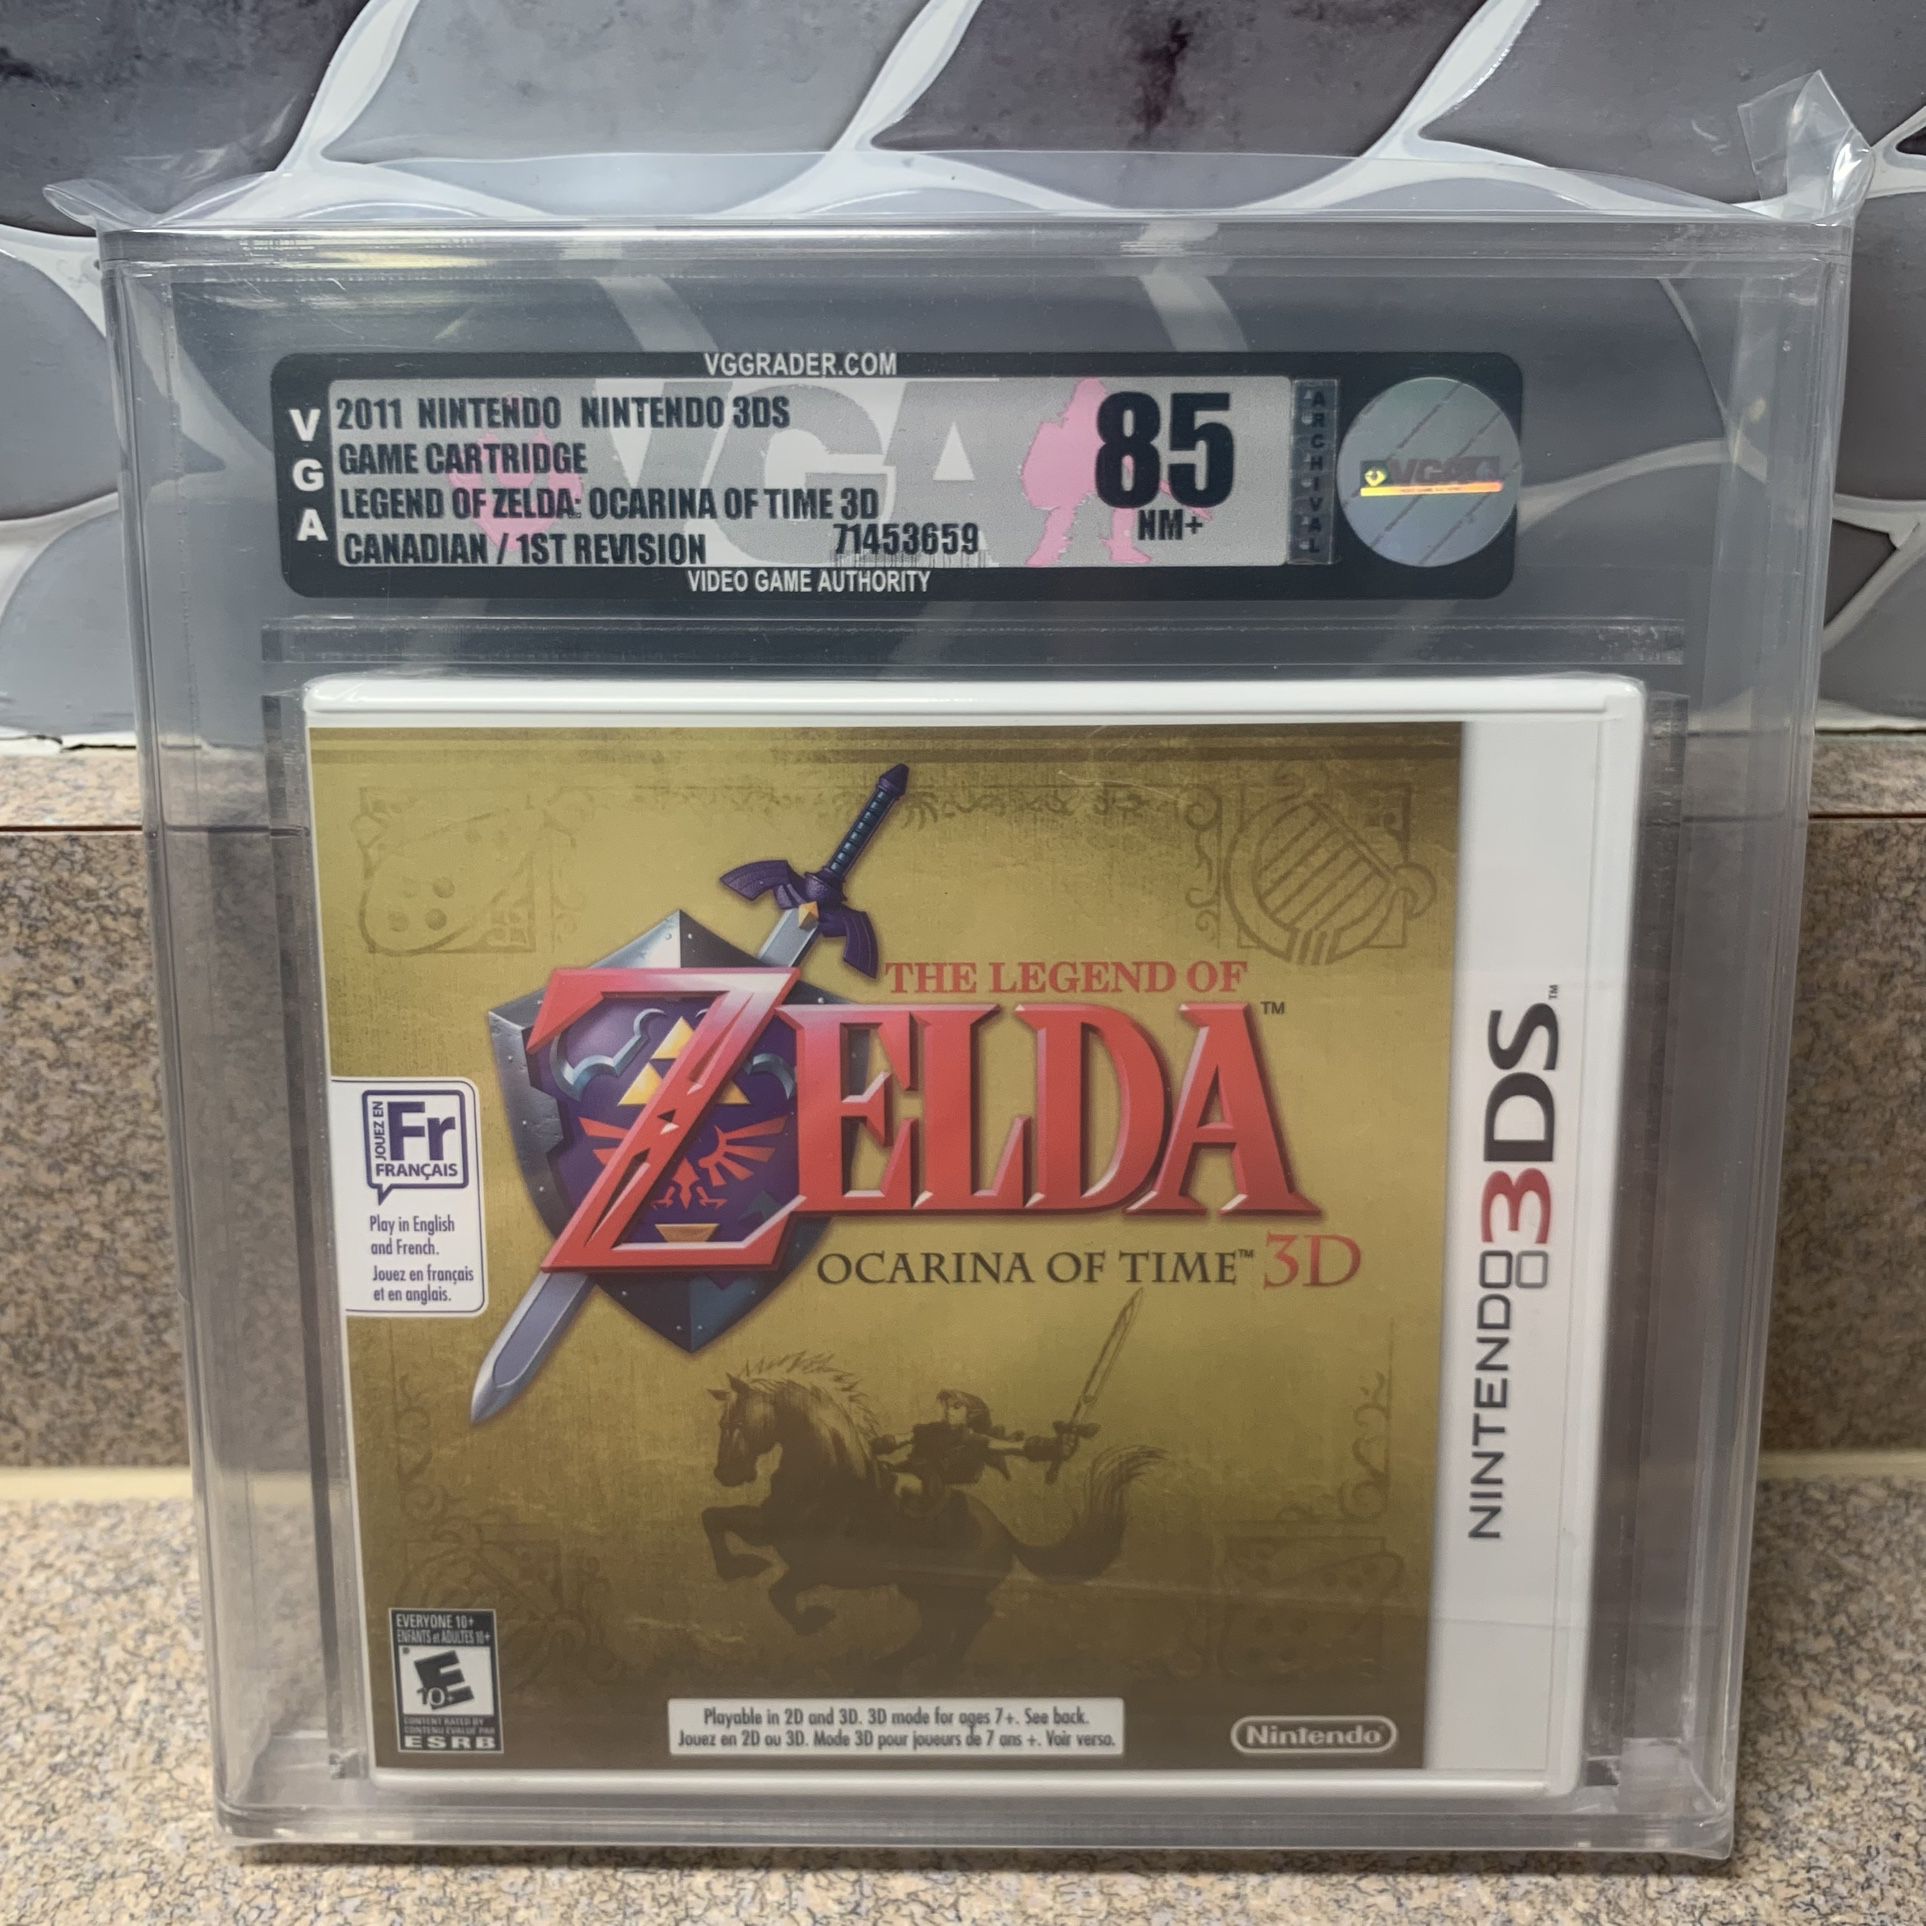 The Legend of Zelda: Ocarina of Time 3D (3DS, 2011) VGA 85 NM + Archival Case UV Protected